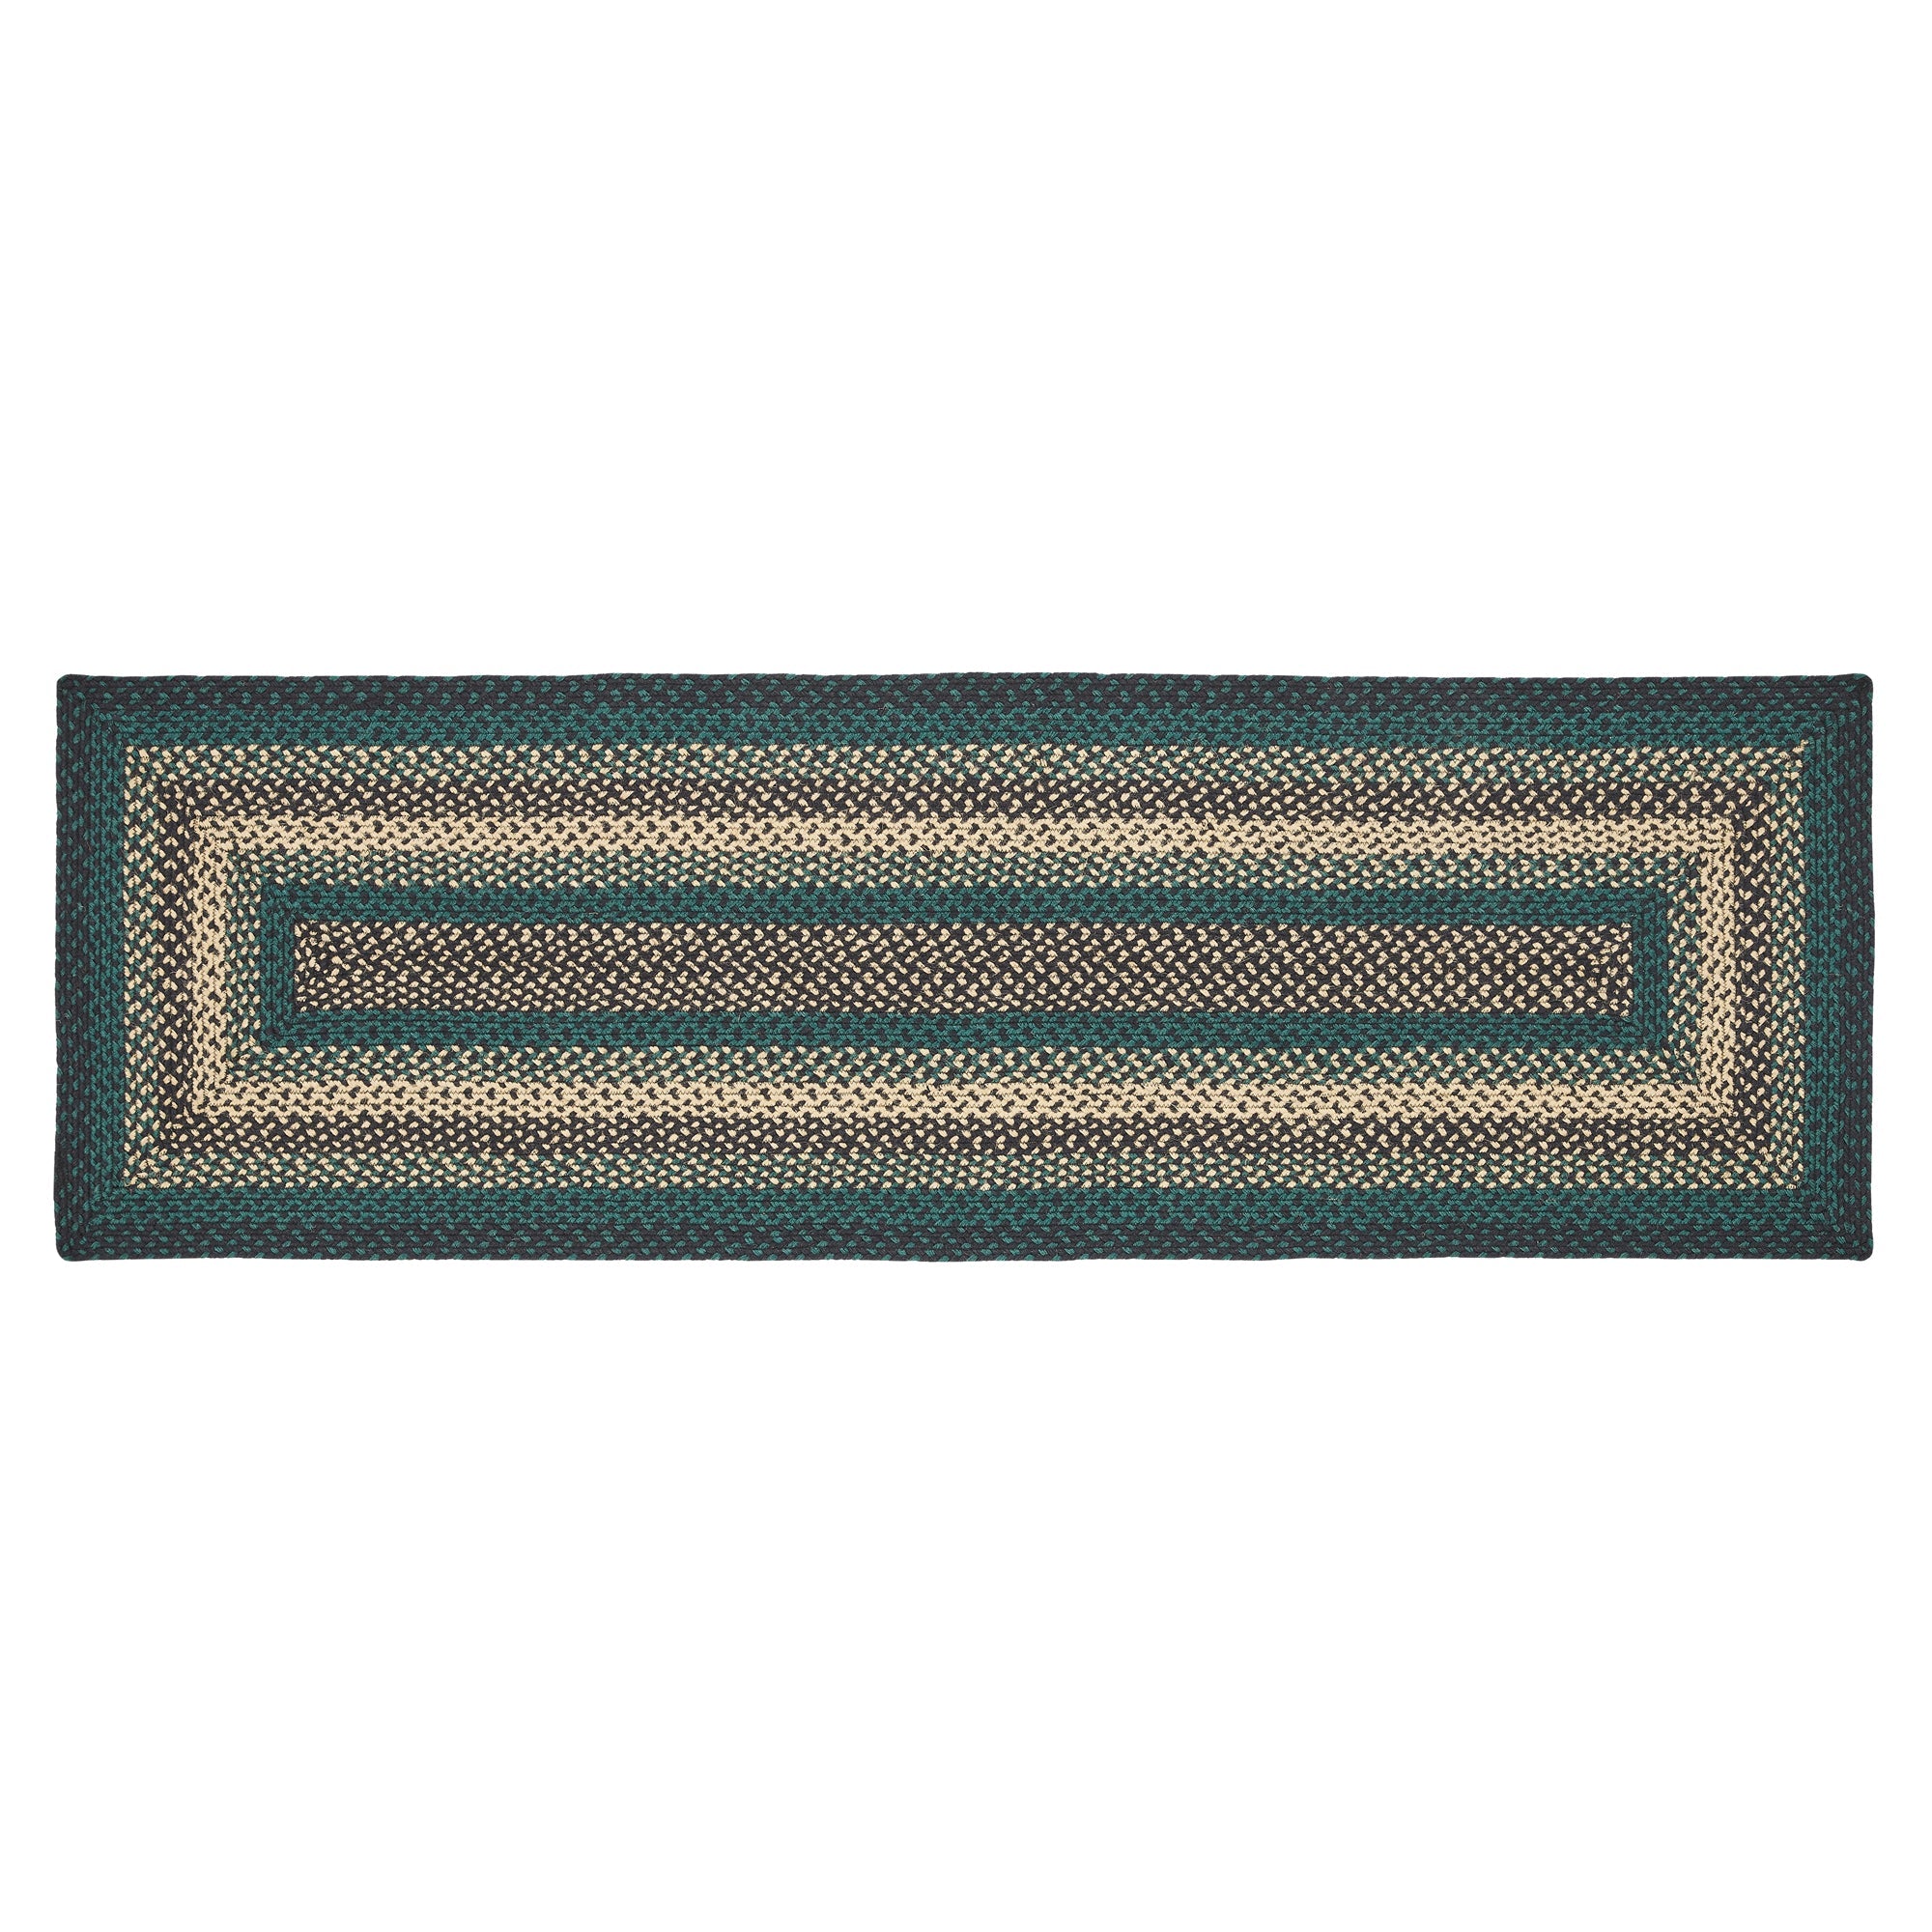 Pine Grove Jute Braided Rug/Runner Rect. with Rug Pad 2'x6.5' VHC Brands